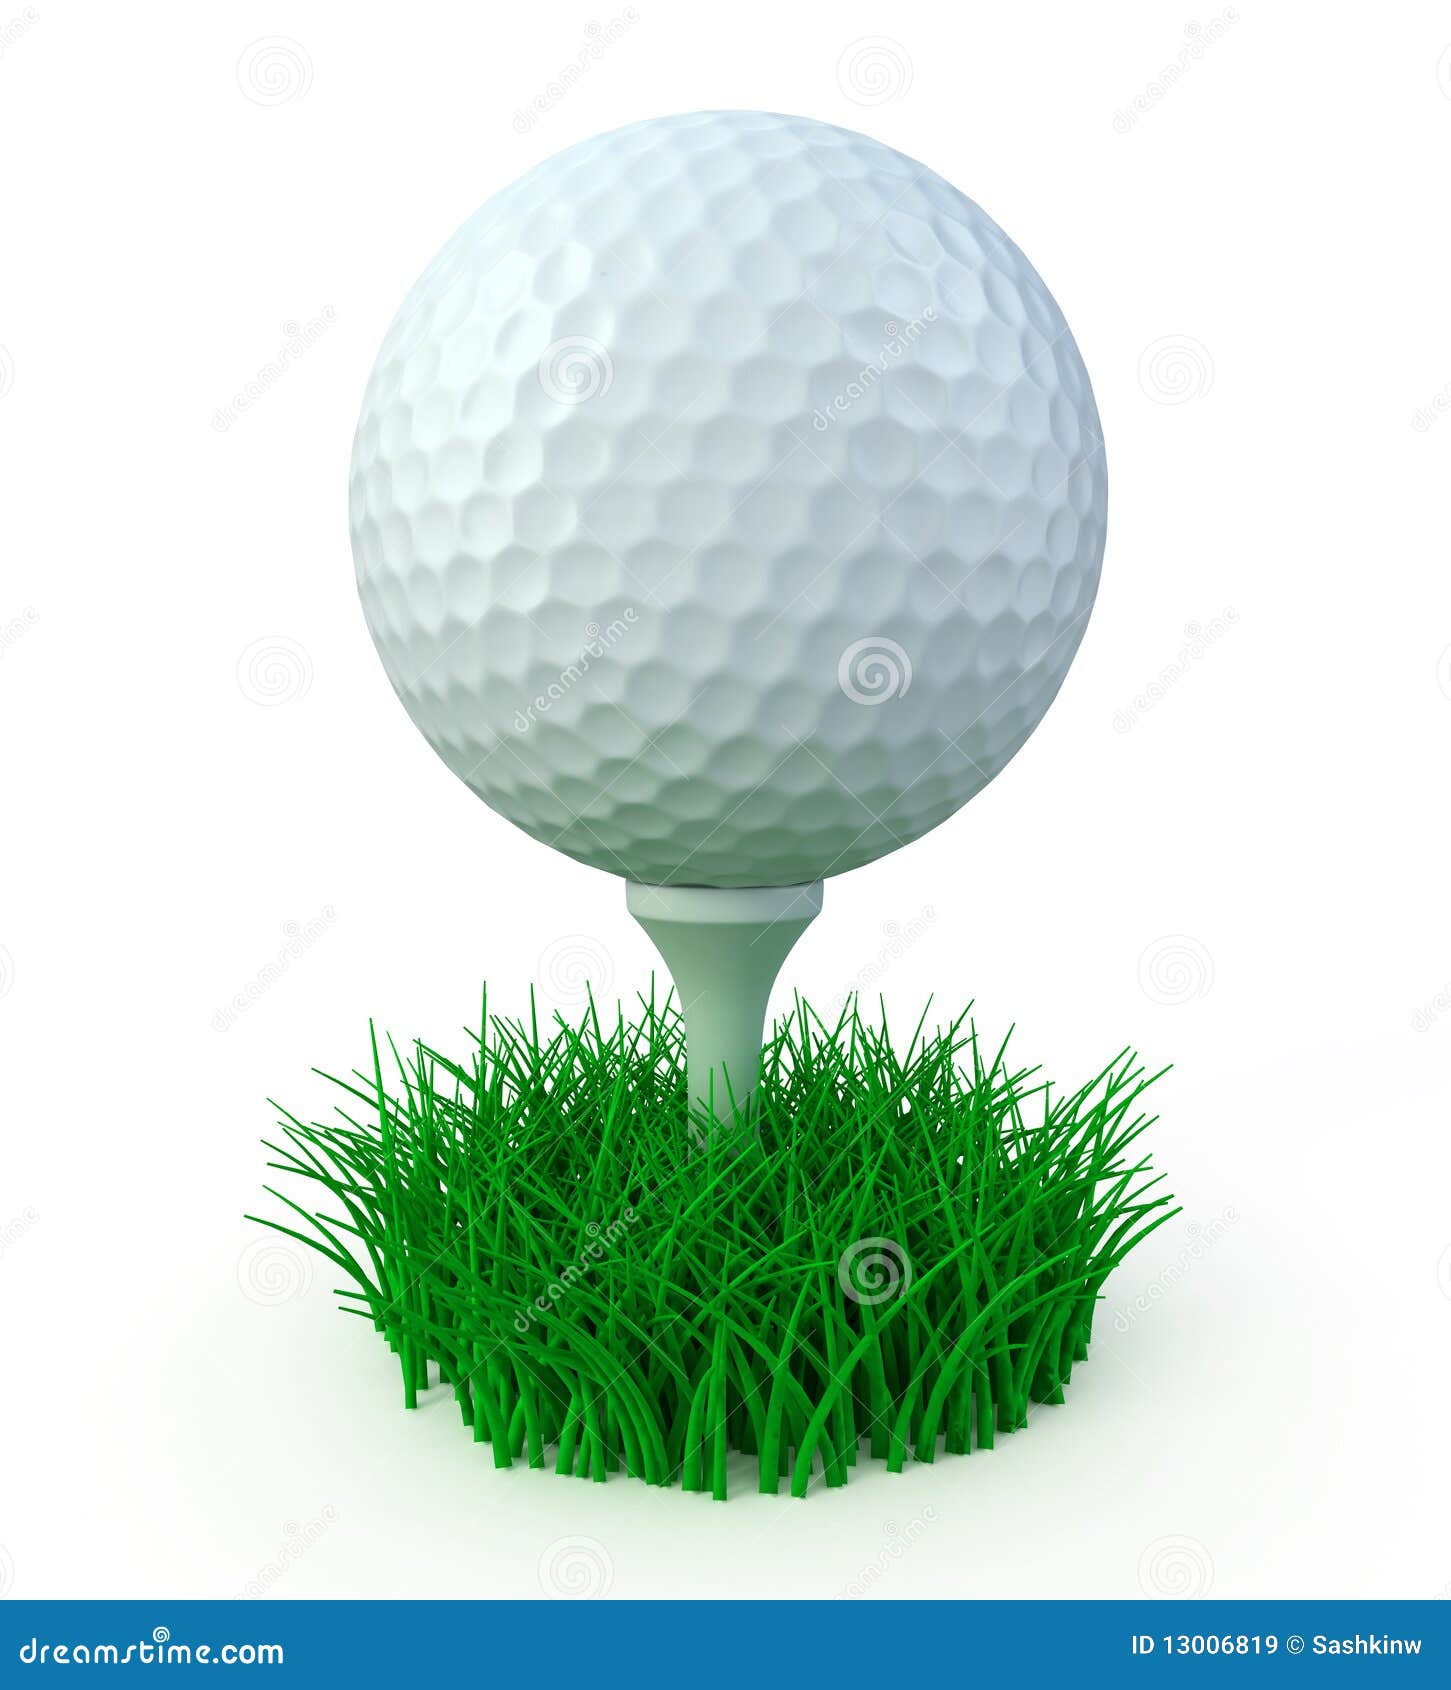 free clipart images golf ball jpg - photo #46